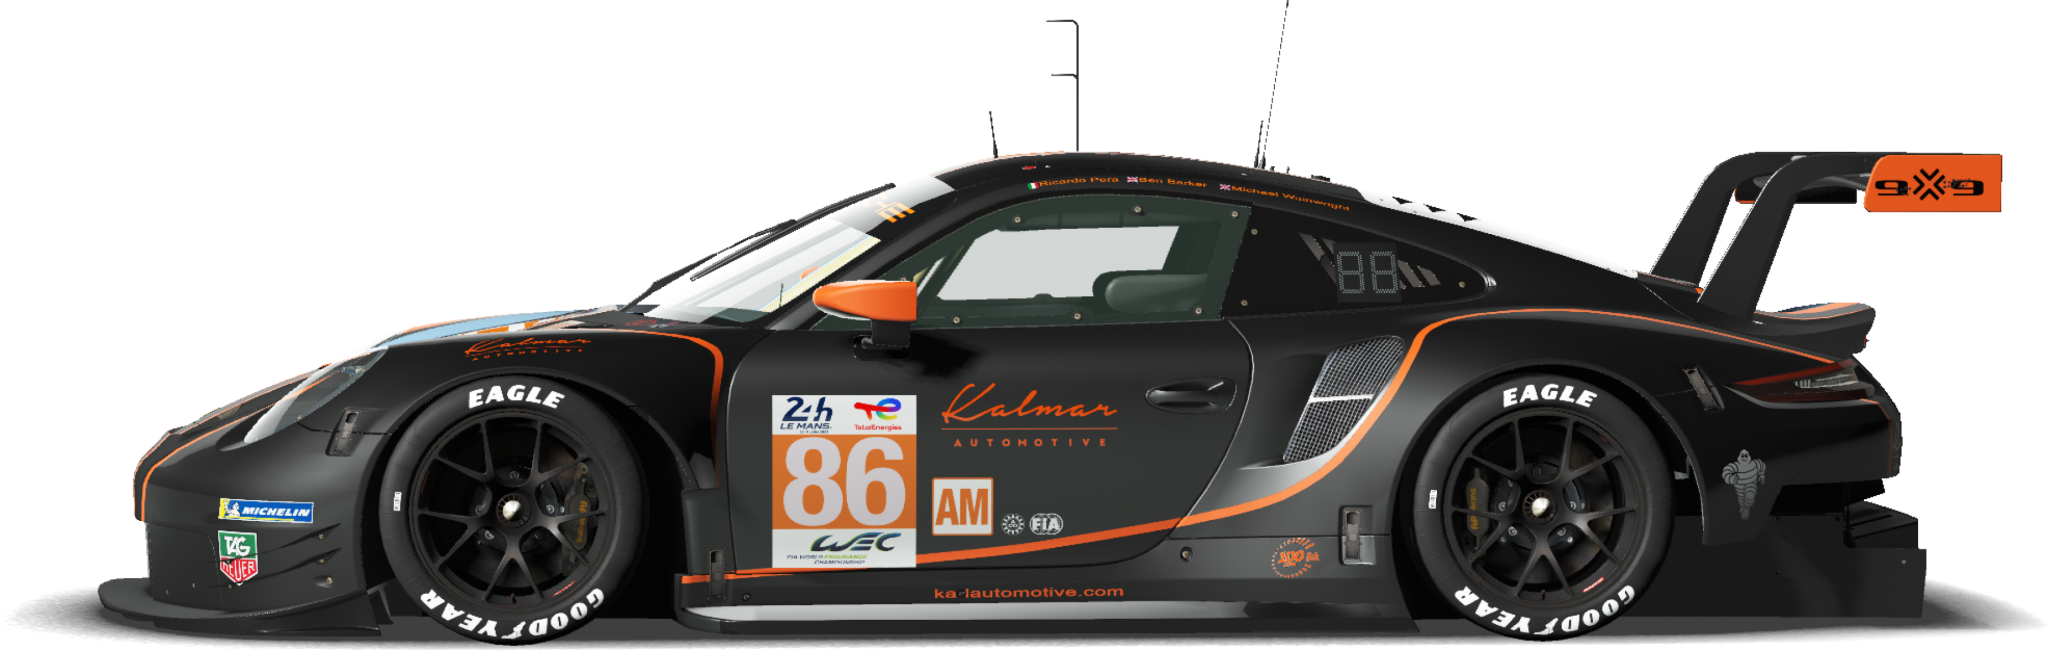 23LM24_086-icon-2048x1152.png